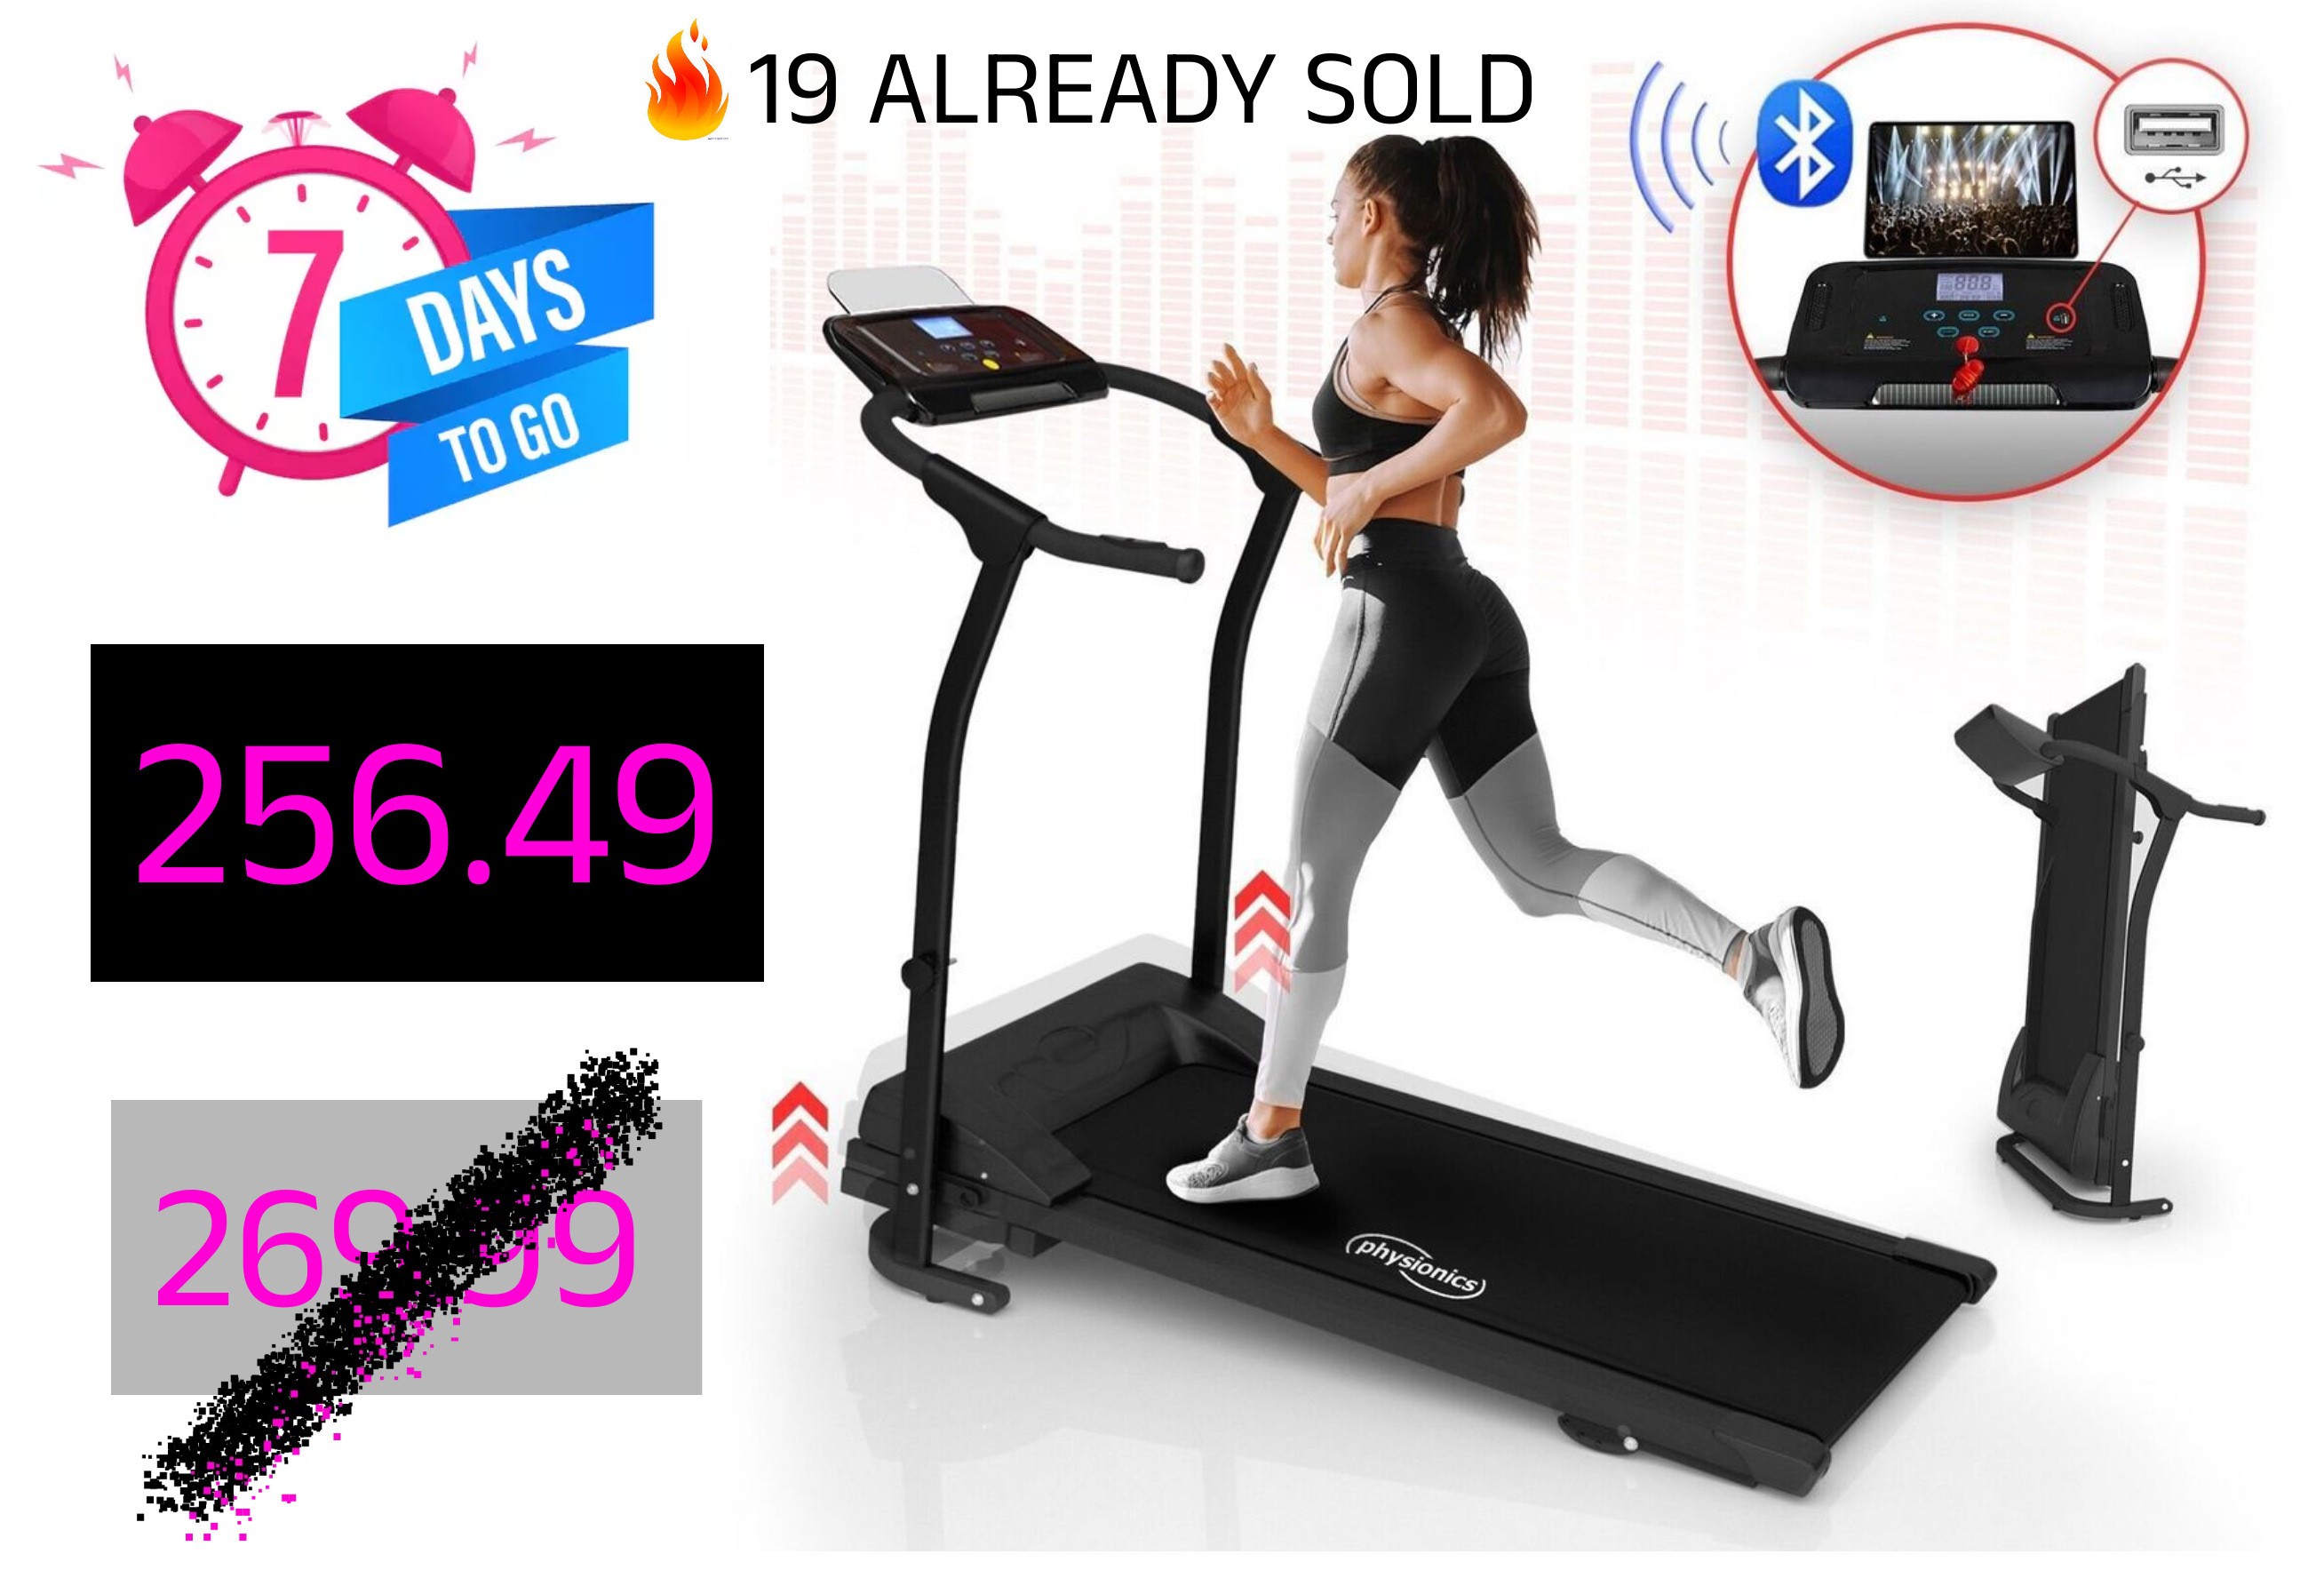 PRO GYM TREADMILL 7 DAY OFFER !!